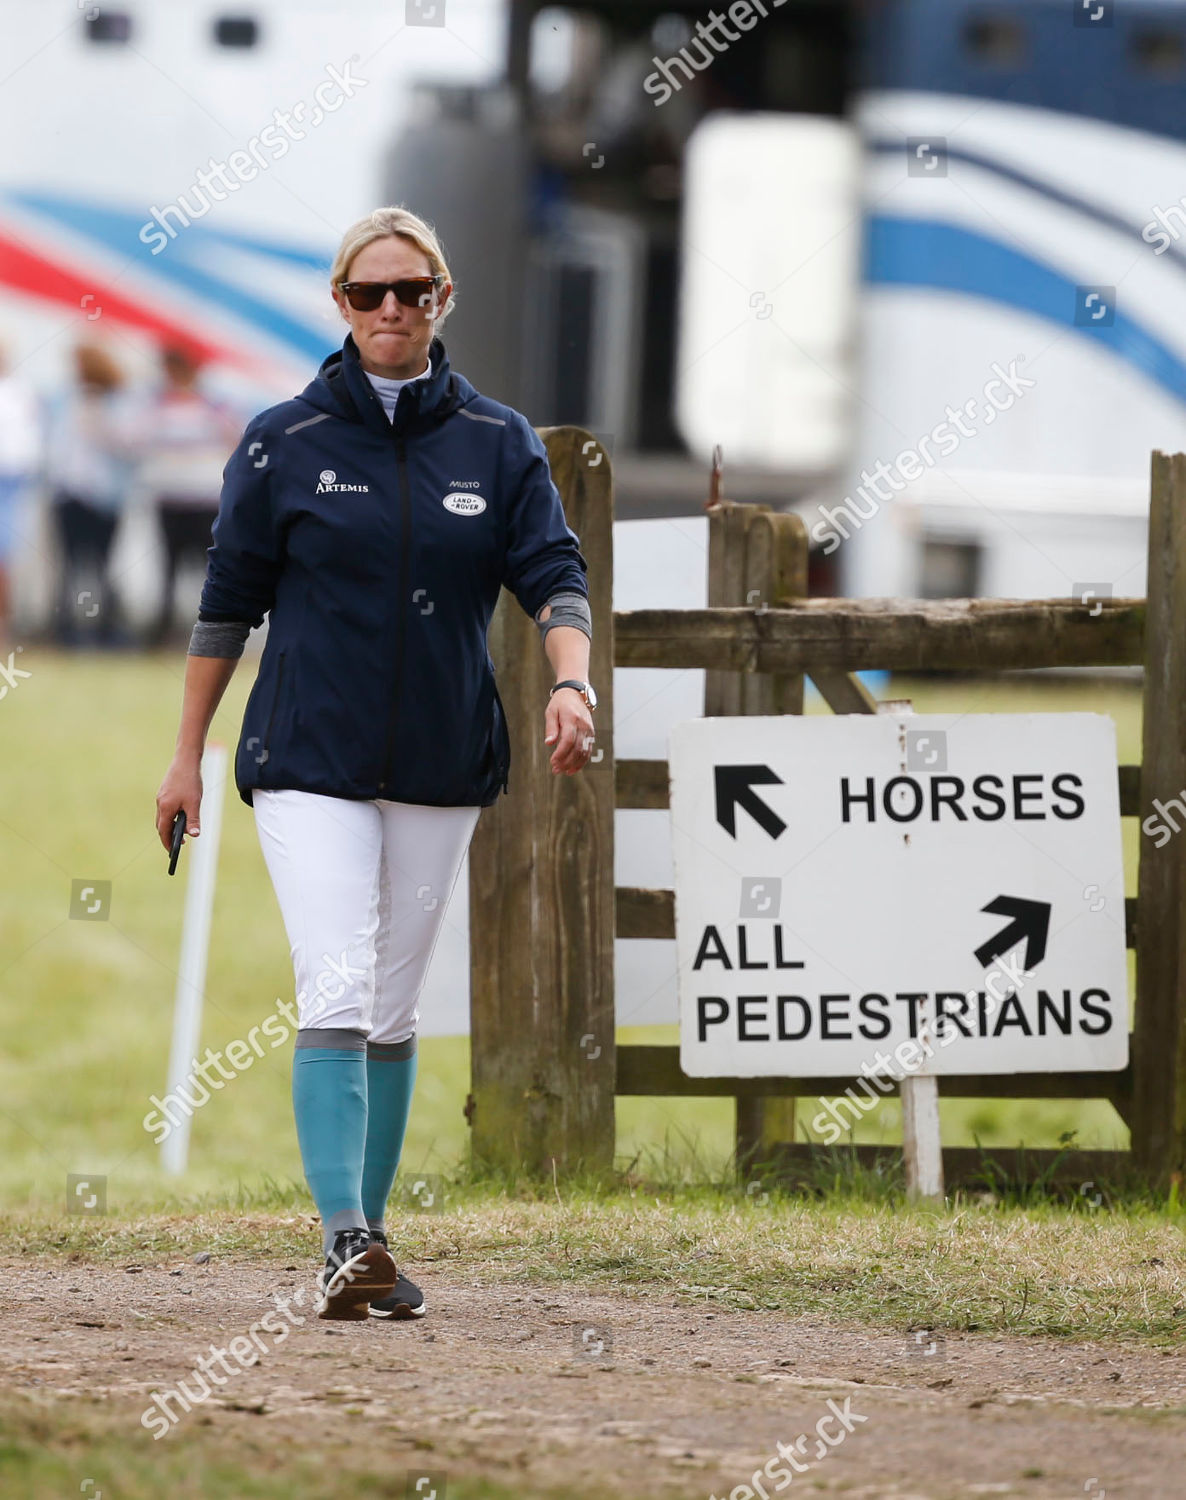 the-whatley-manor-horse-trials-gatcombe-park-gloucestershire-uk-shutterstock-editorial-10414494o.jpg